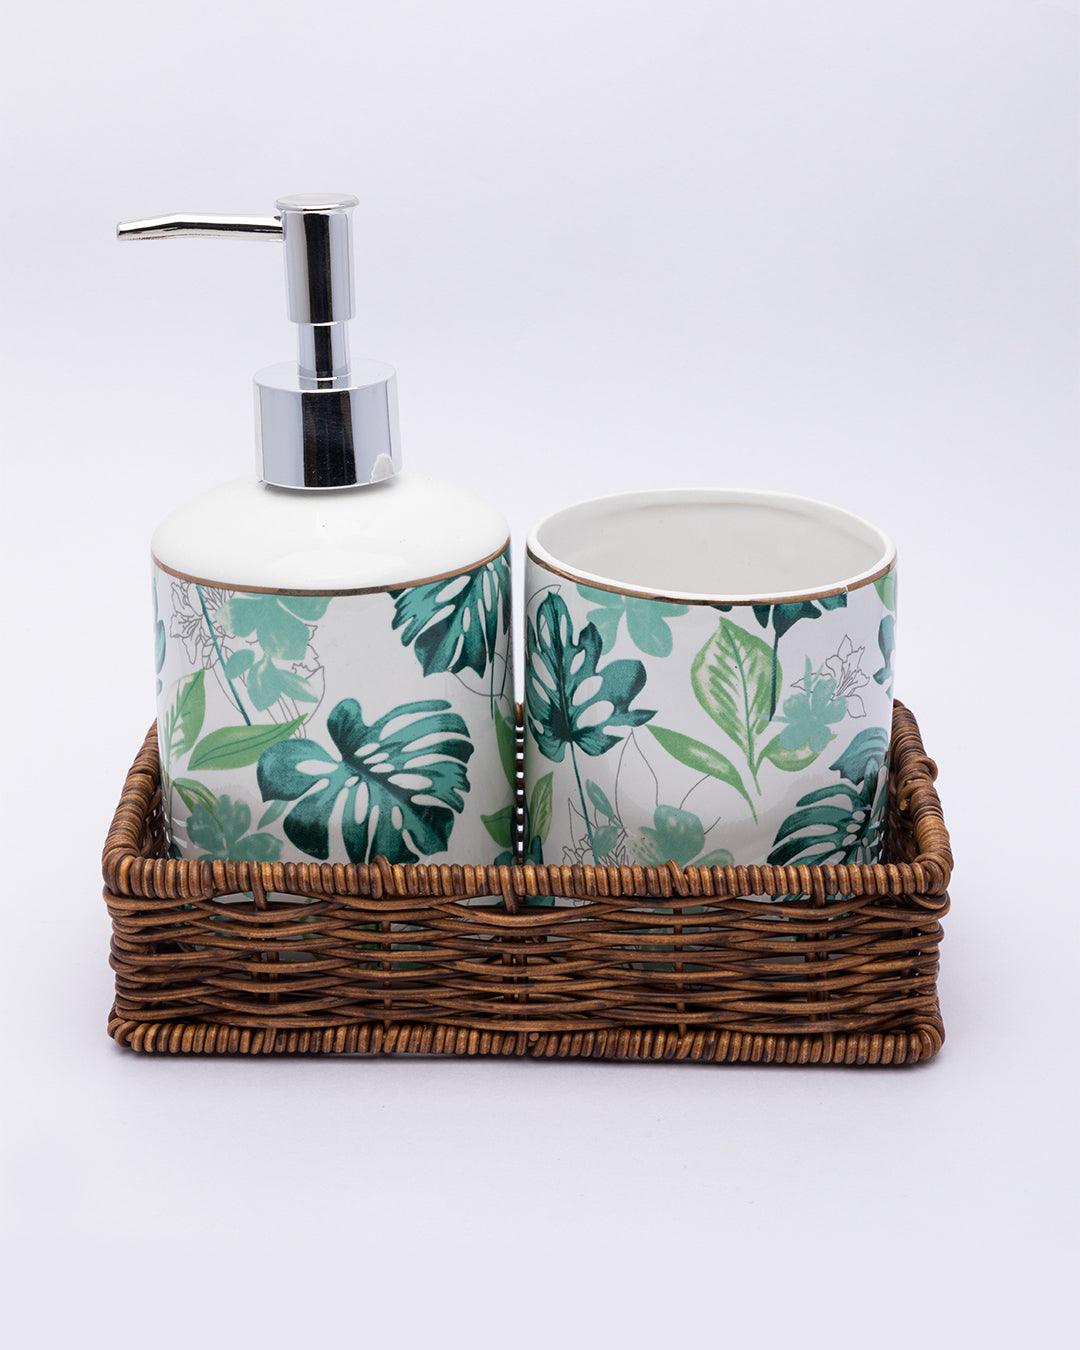 Market99 Bathroom Set, Rust Proof Chrome Finish, with Wooden Top, Green, Ceramic - MARKET 99